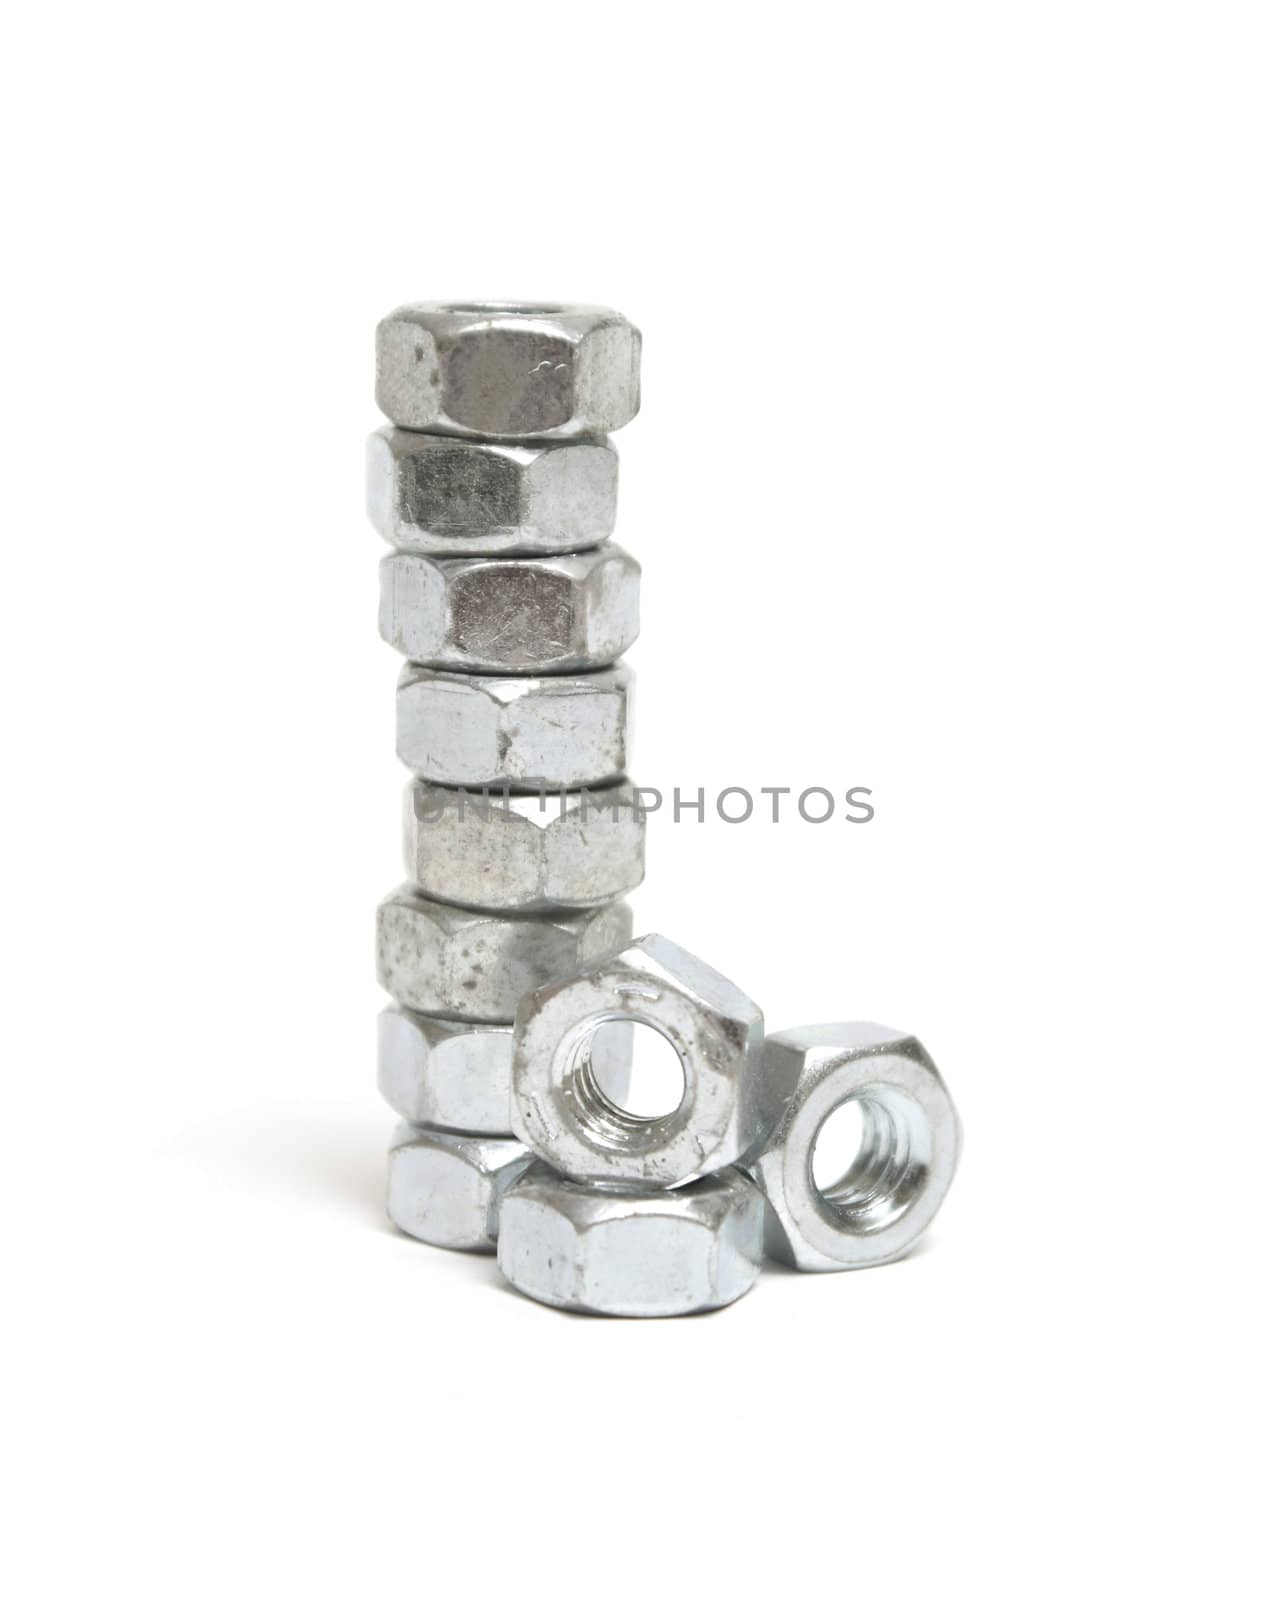 A stack of construction nuts isolated on white.